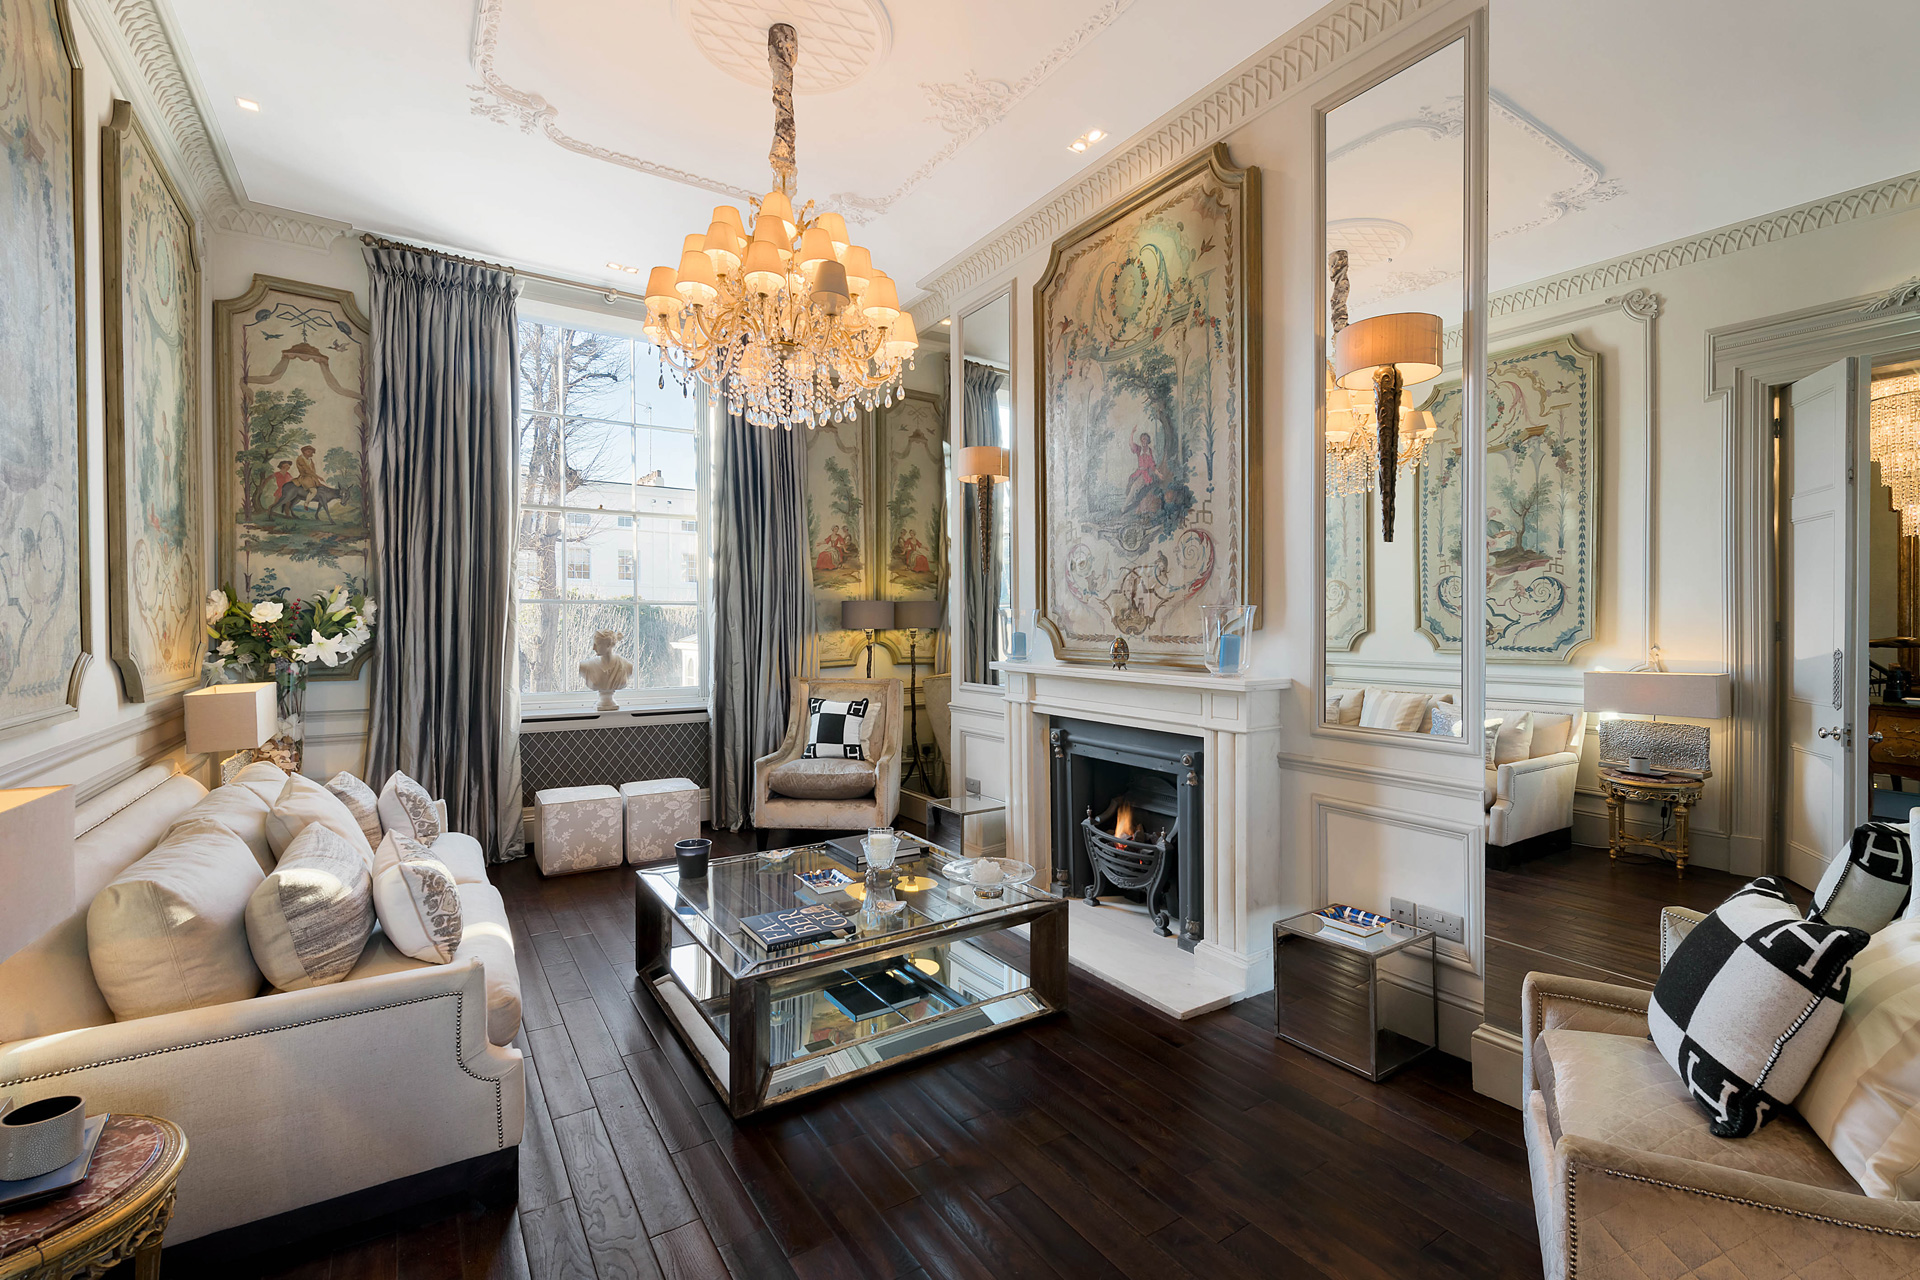 Large reception room with dark wood flooring, cream sofas, and a chandelier